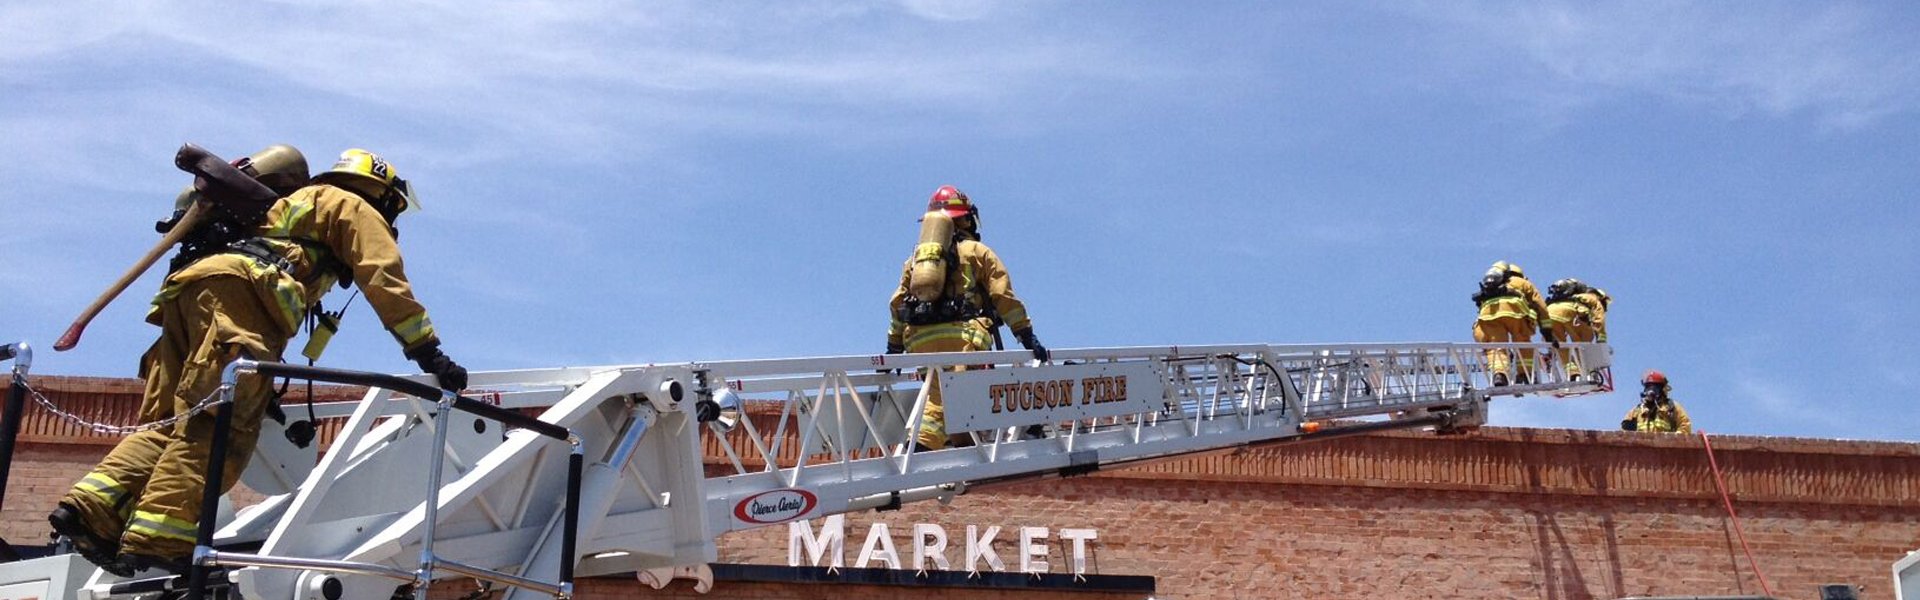 Firefighters on ladder